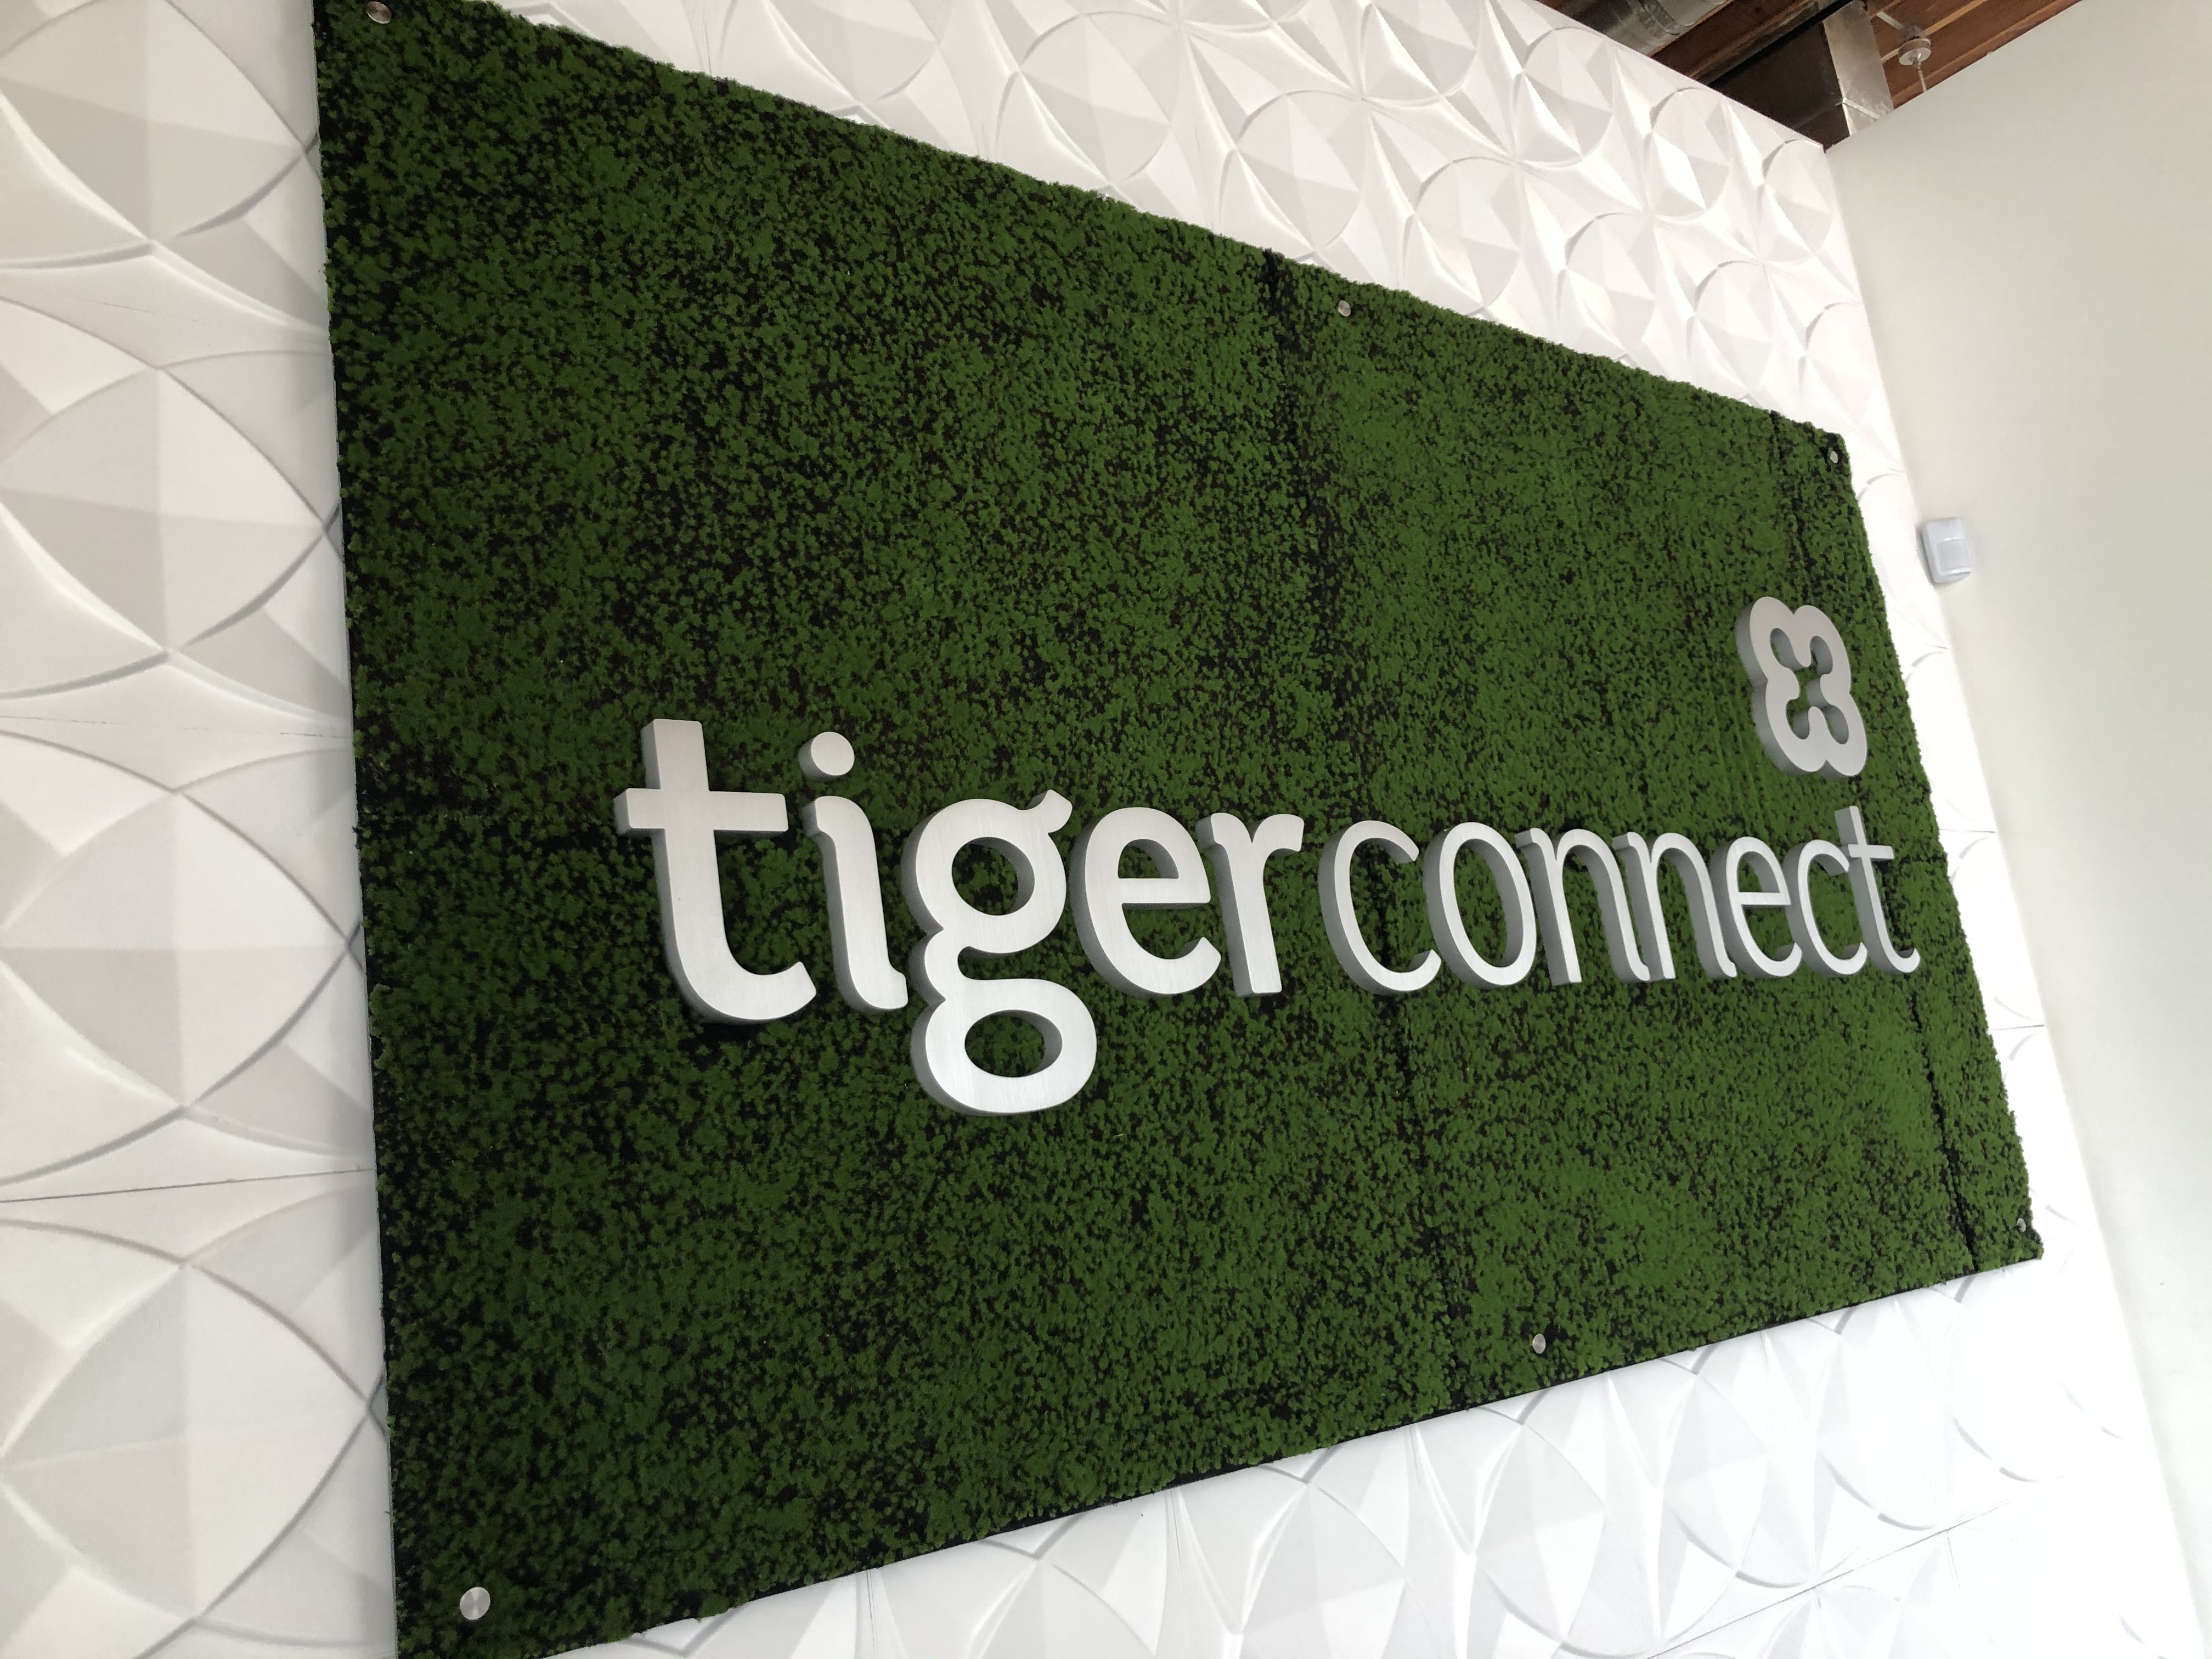 This lobby sign project included prismatic background wallpaper. So now Tiger Connect's Santa Monica office looks complete!